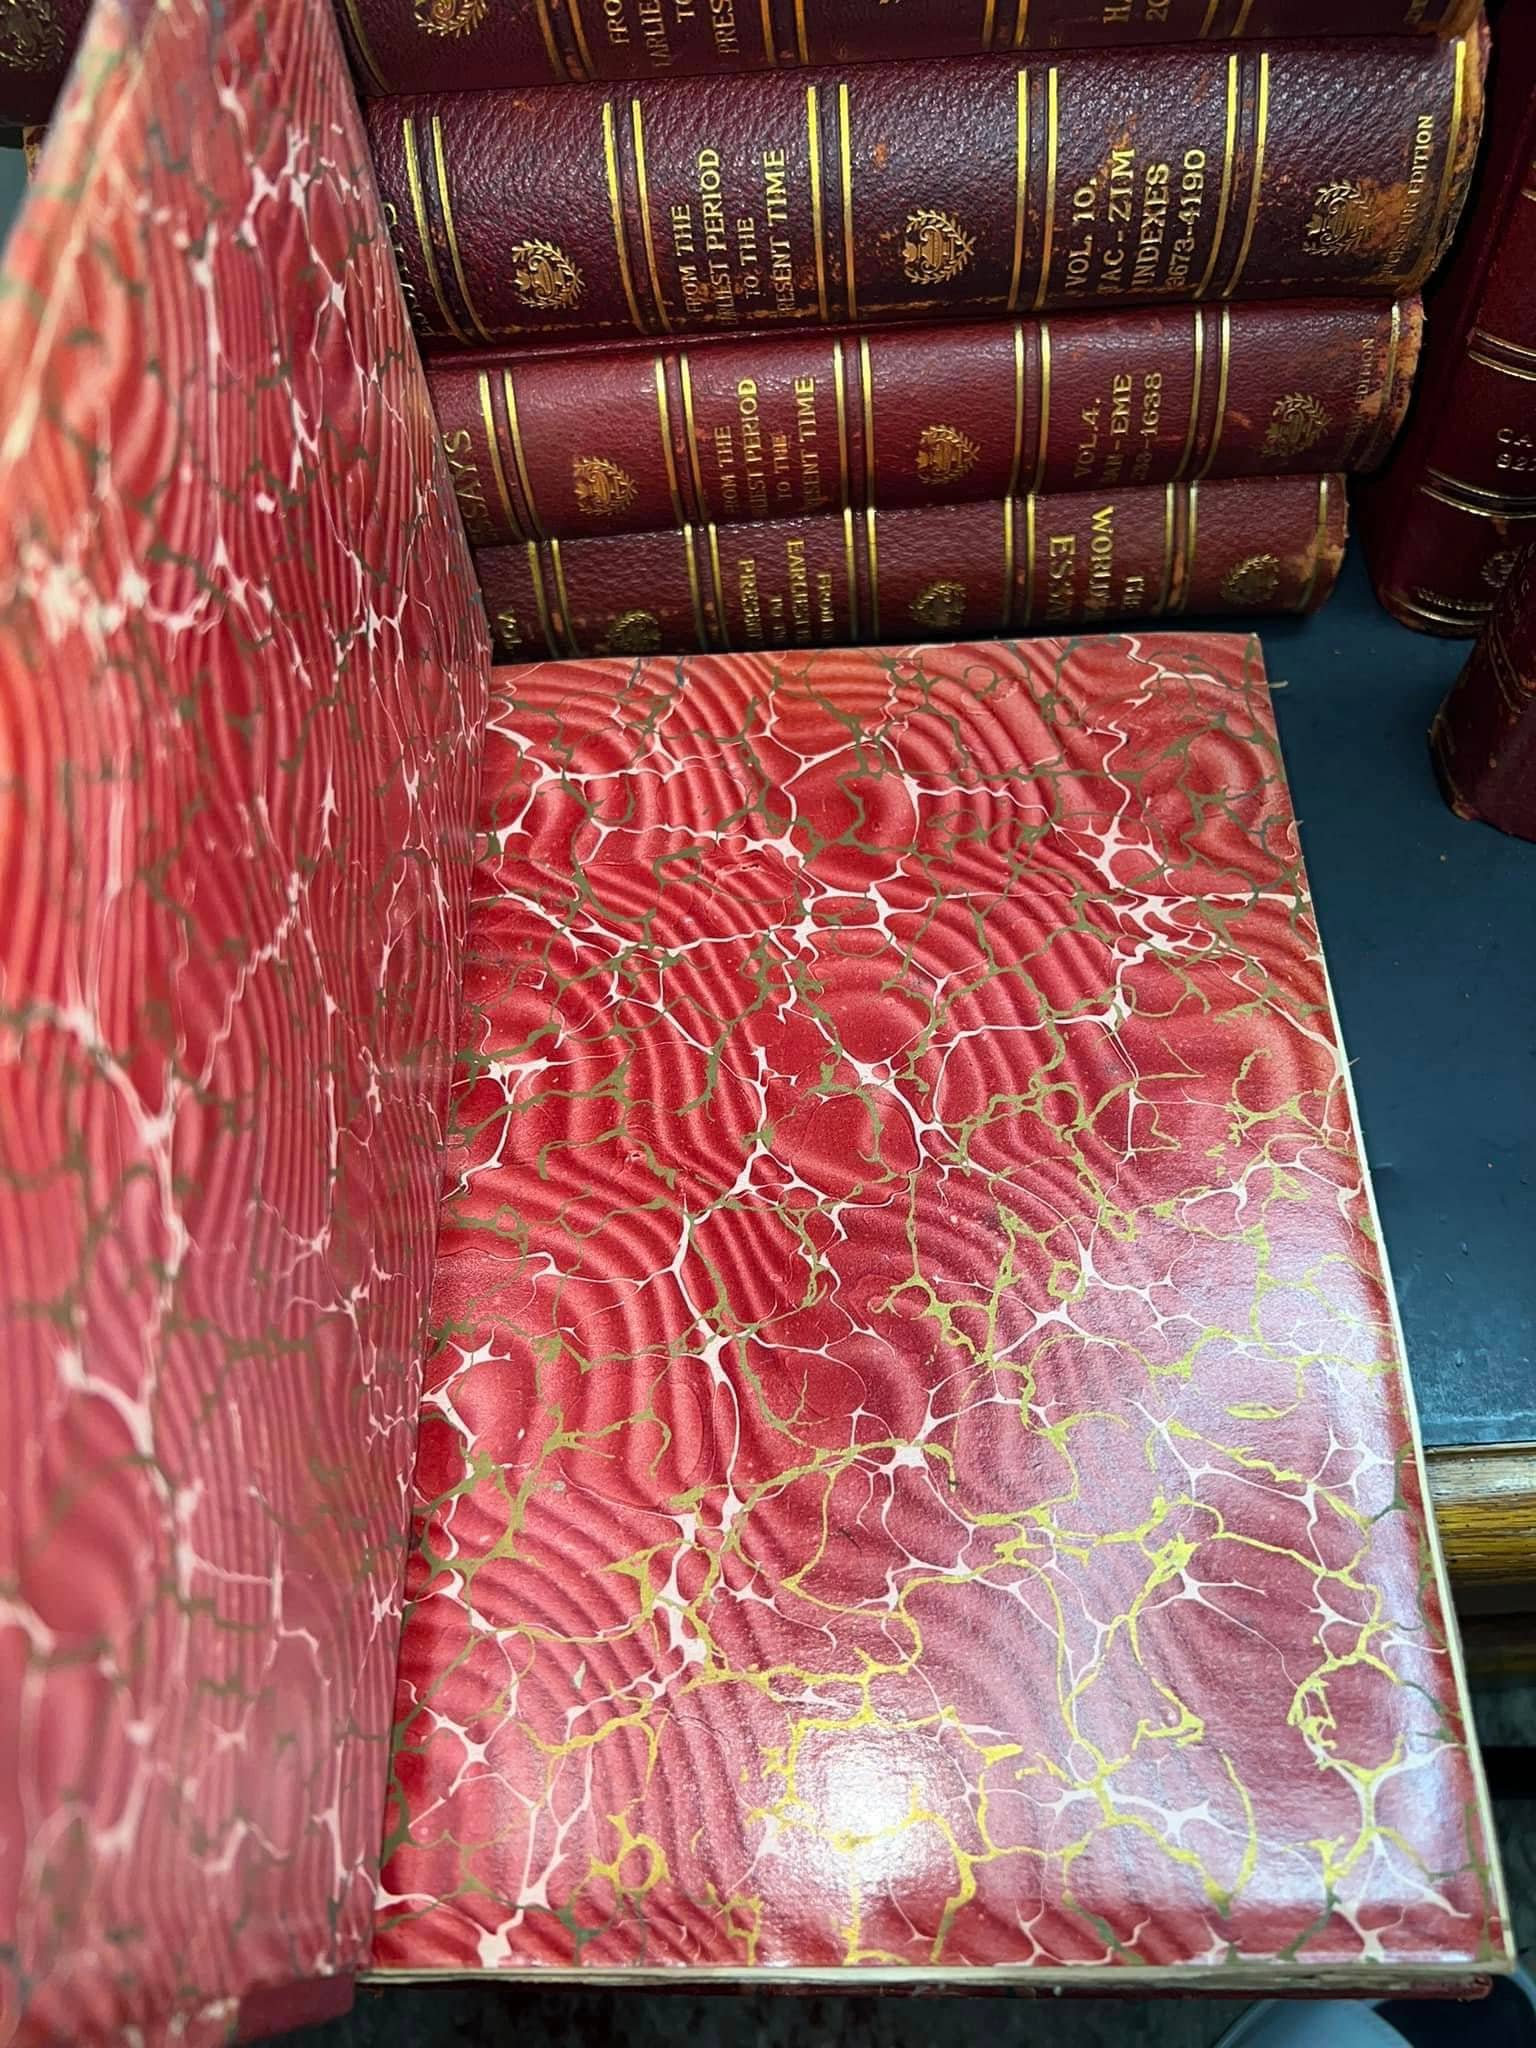 Antique books 1900 The worlds best essays 10 volume set - signed limited edition gorgeous red leather fine binding